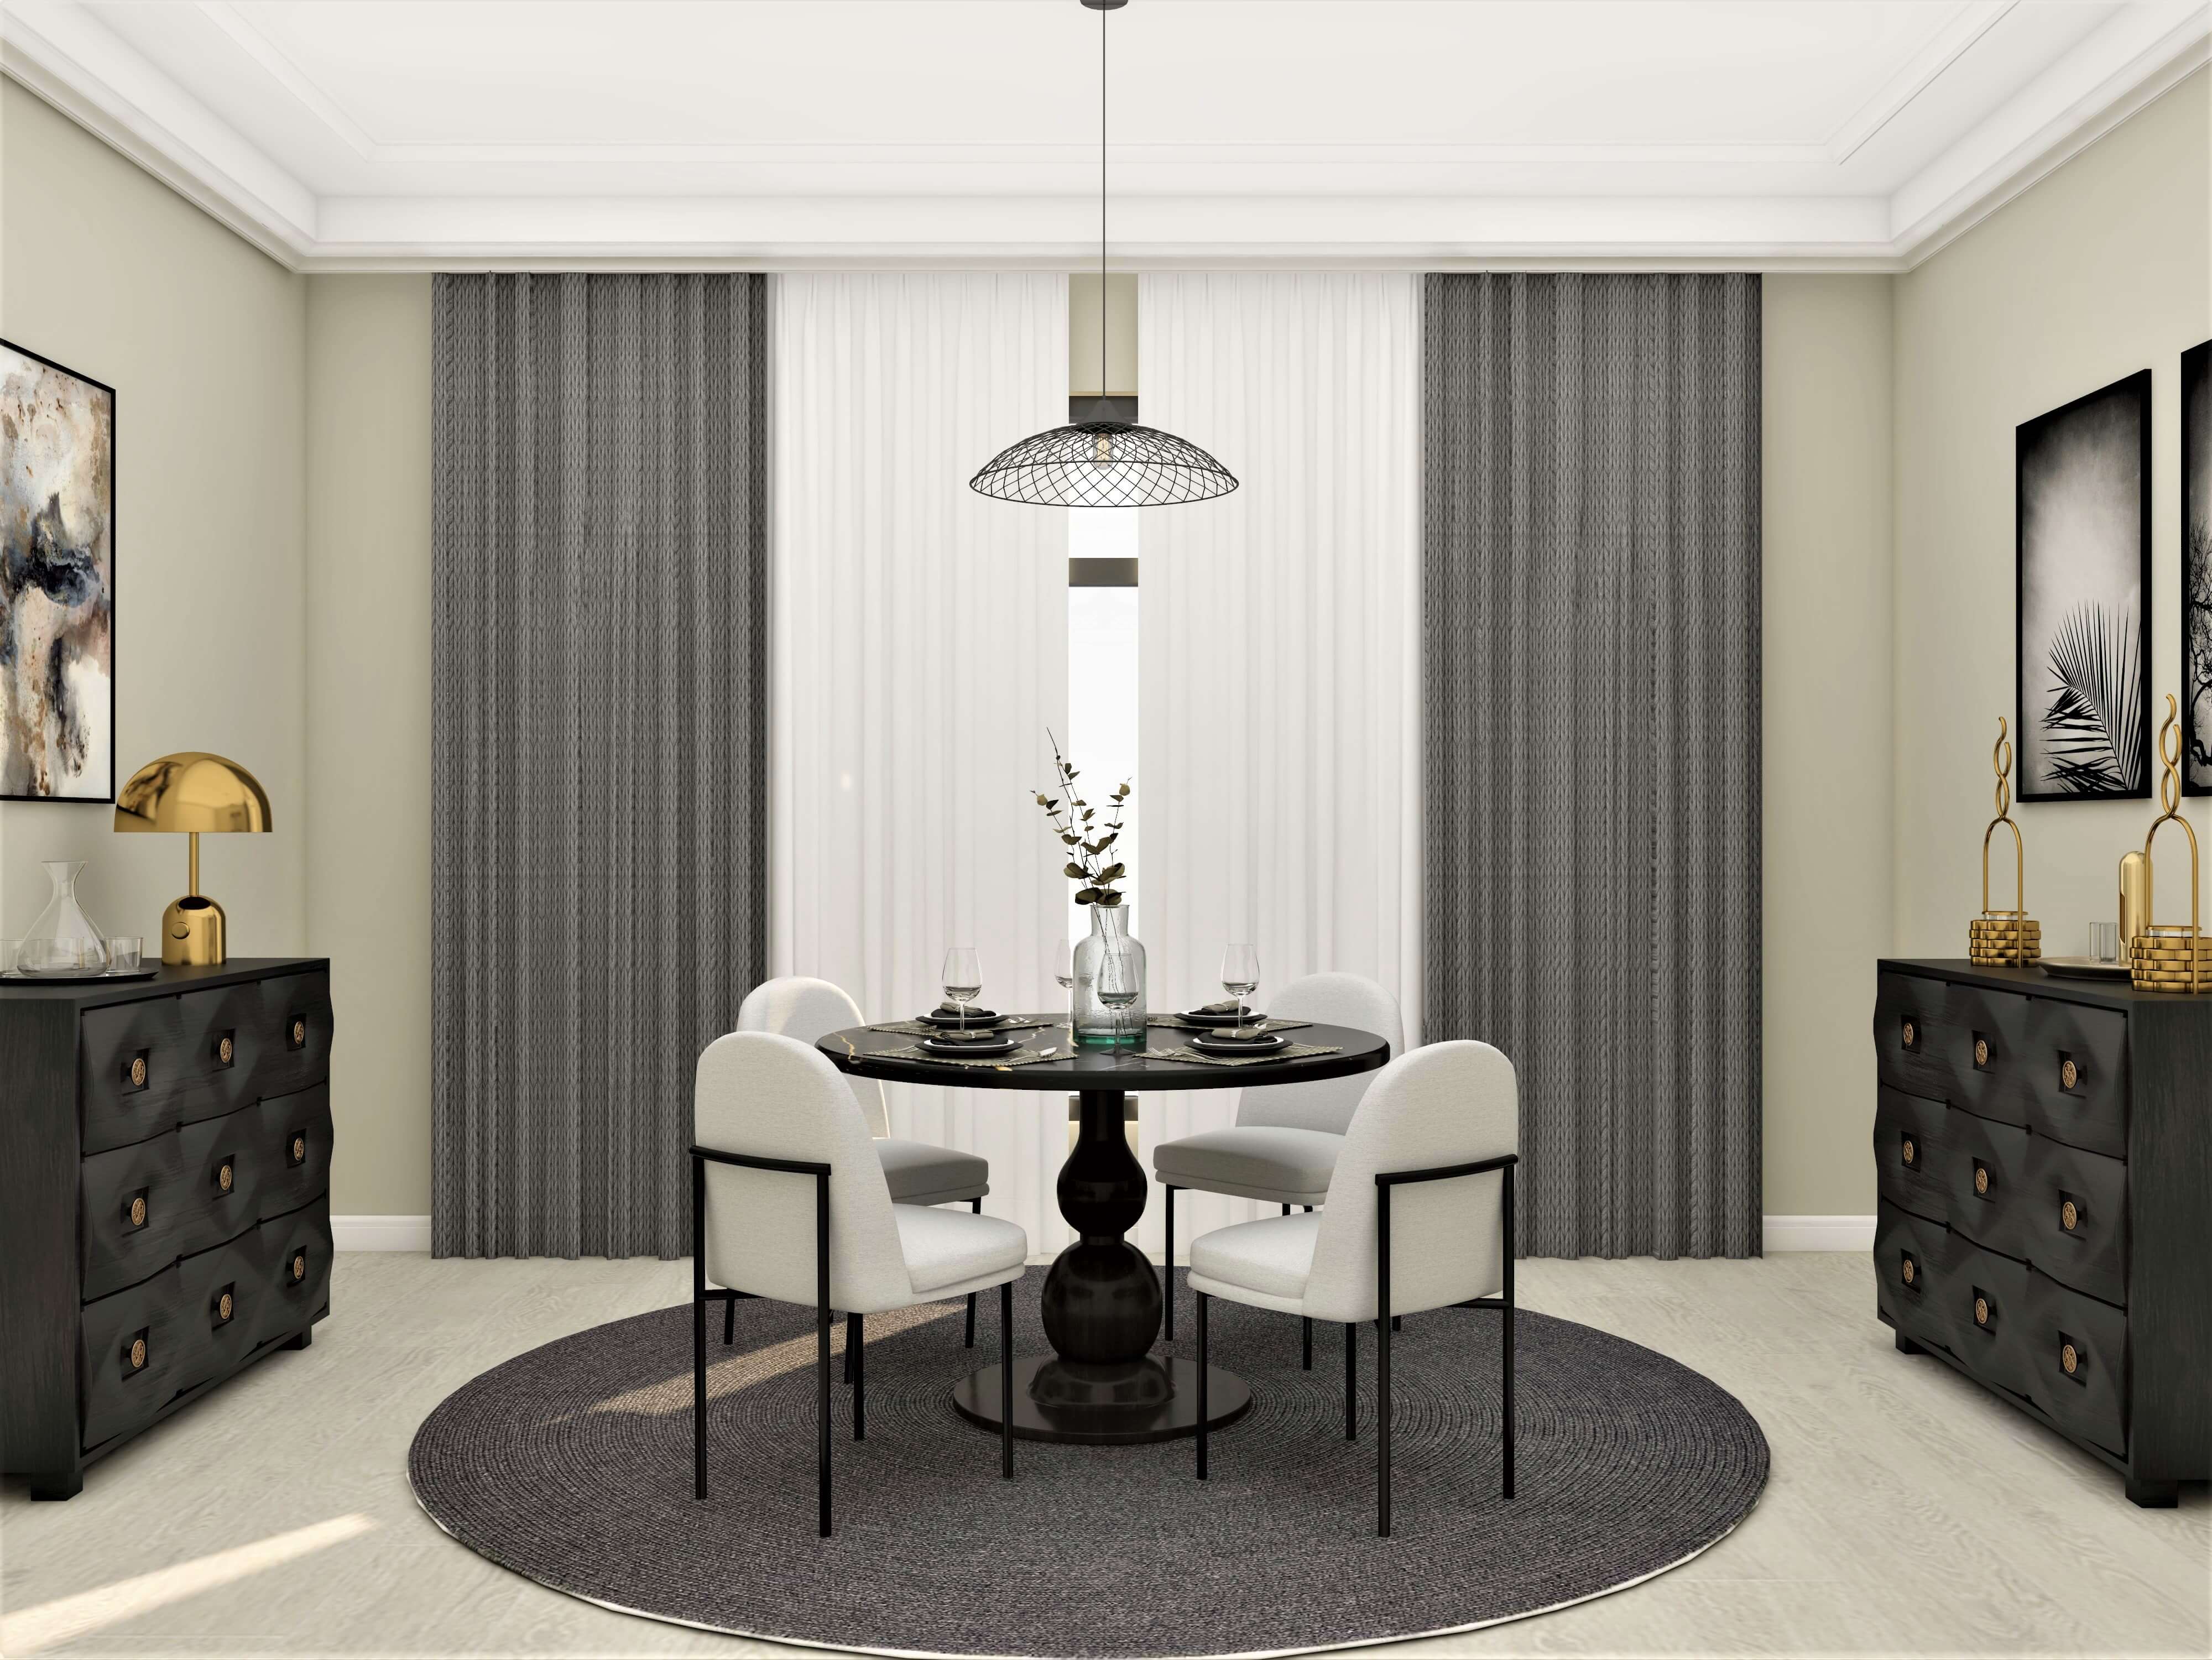 Modern style four-seater dining room design - Beautiful Homes